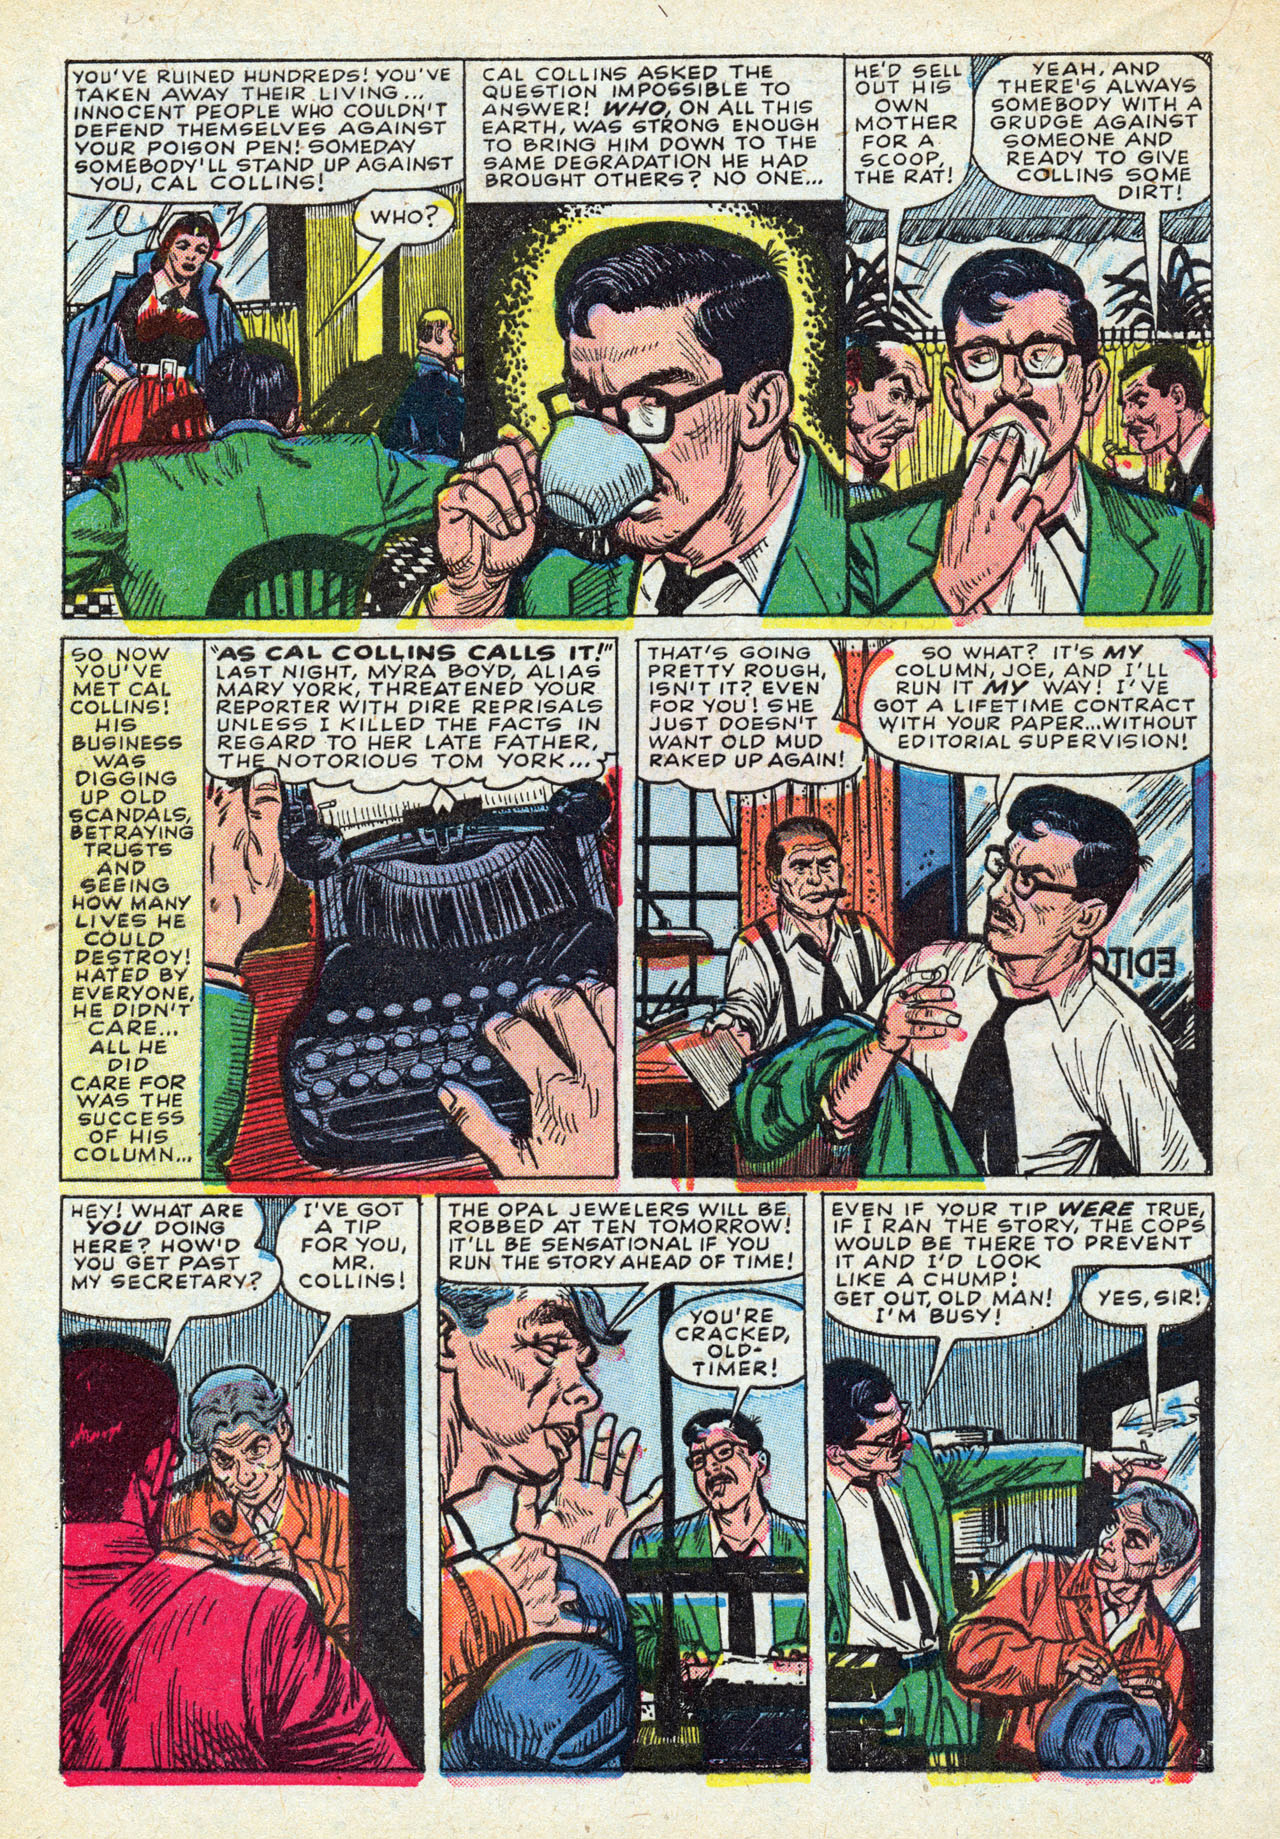 Marvel Tales (1949) 132 Page 3